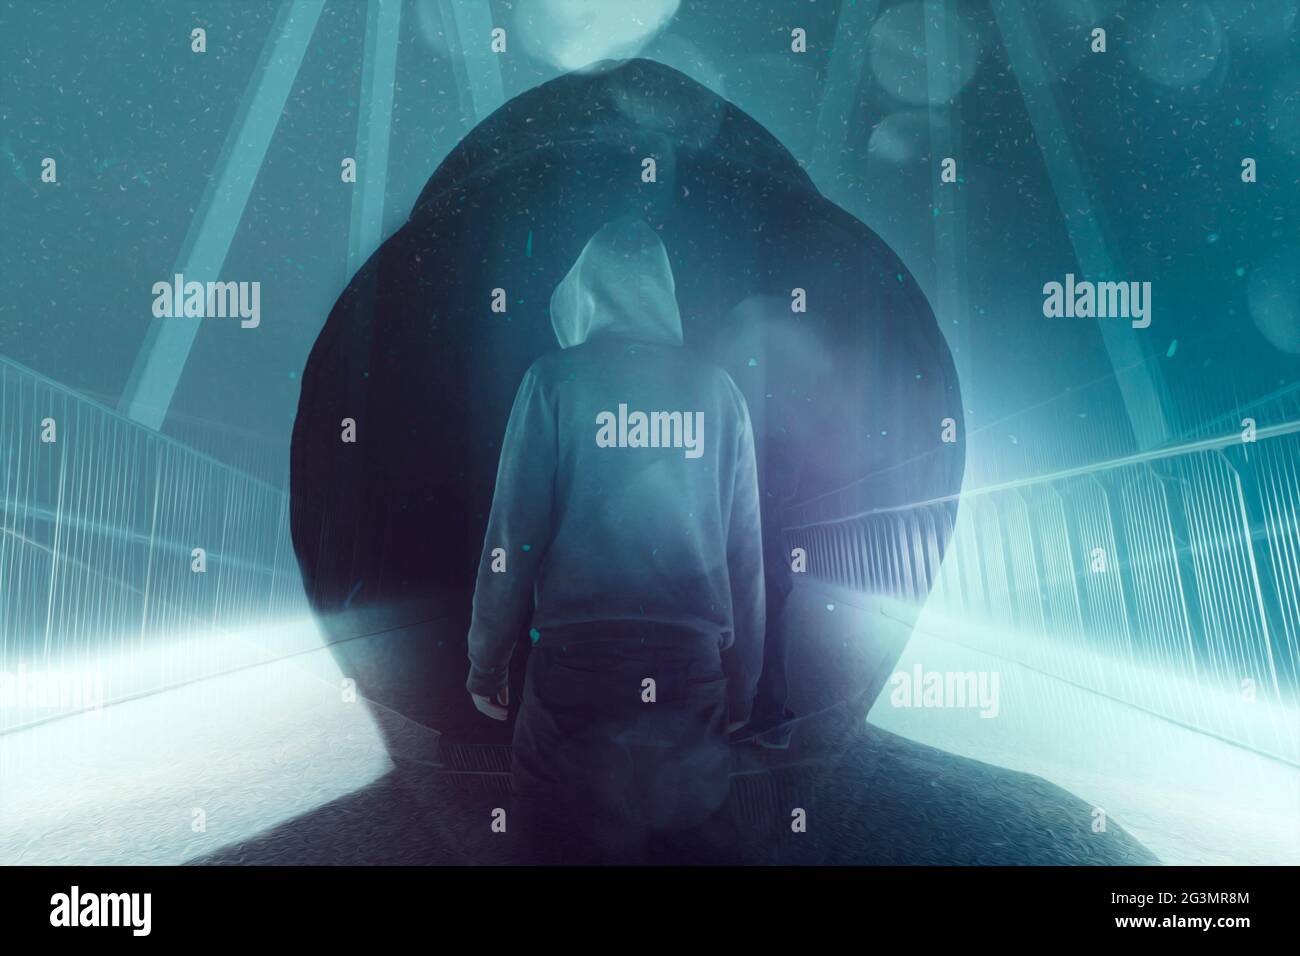 A double exposure of a mysterious hooded figure standing  on a path on a bridge. Silhouetted against bright lights at night. With a neon, retro, scien Stock Photo